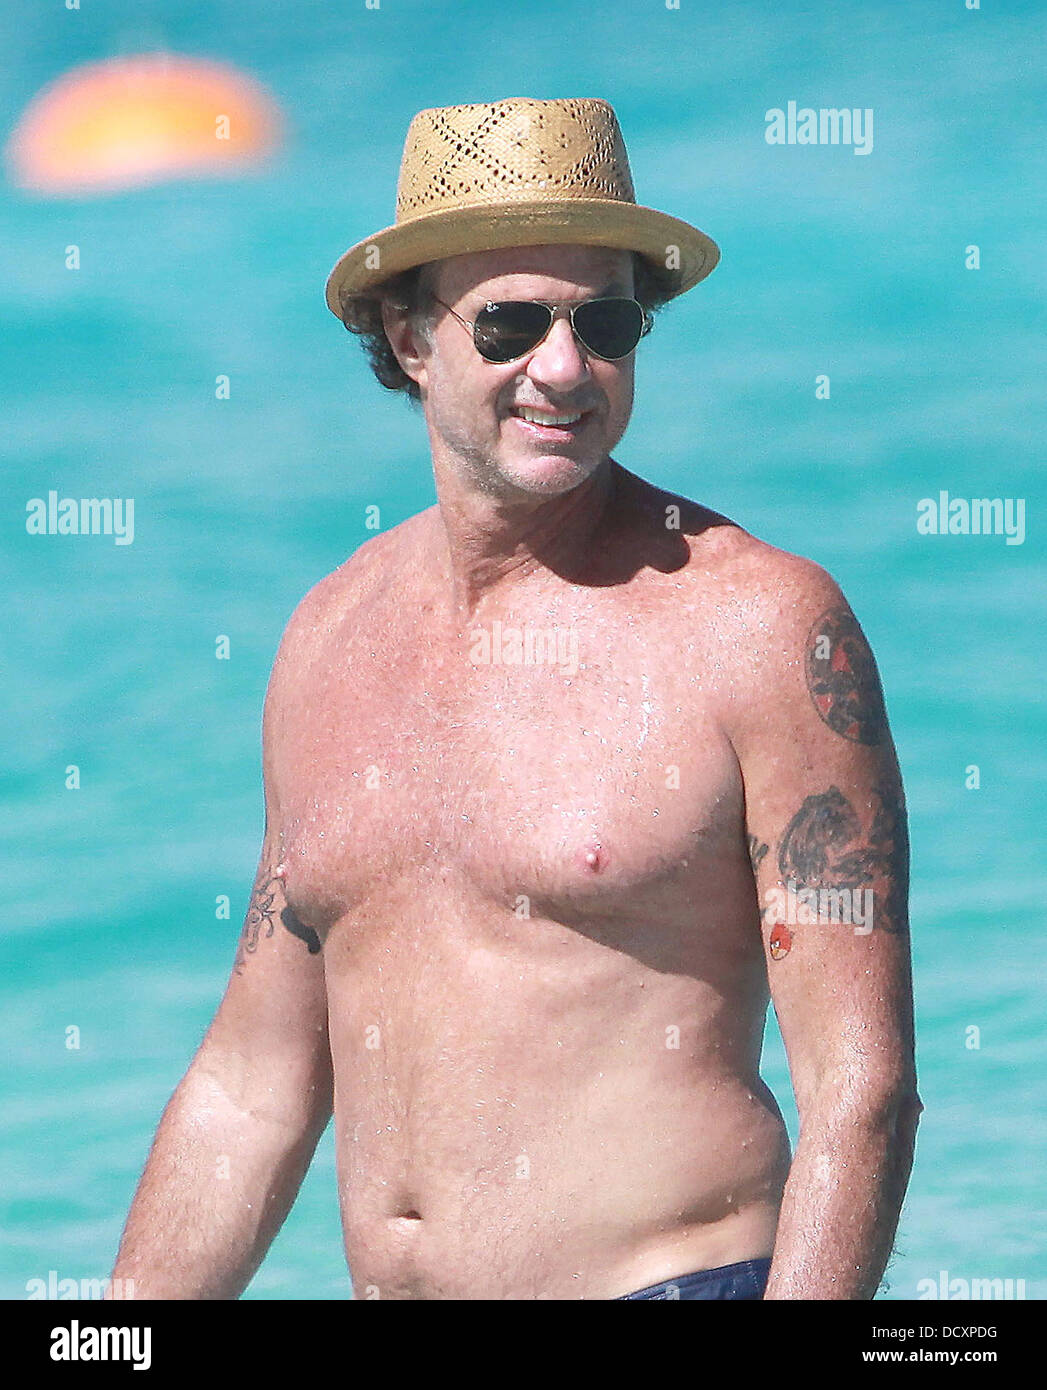 Red Hot Chili Peppers drummer Chad Smith enjoying time at the beach on St  Barthelemy Island. St Barts - 28.12.11 Stock Photo - Alamy